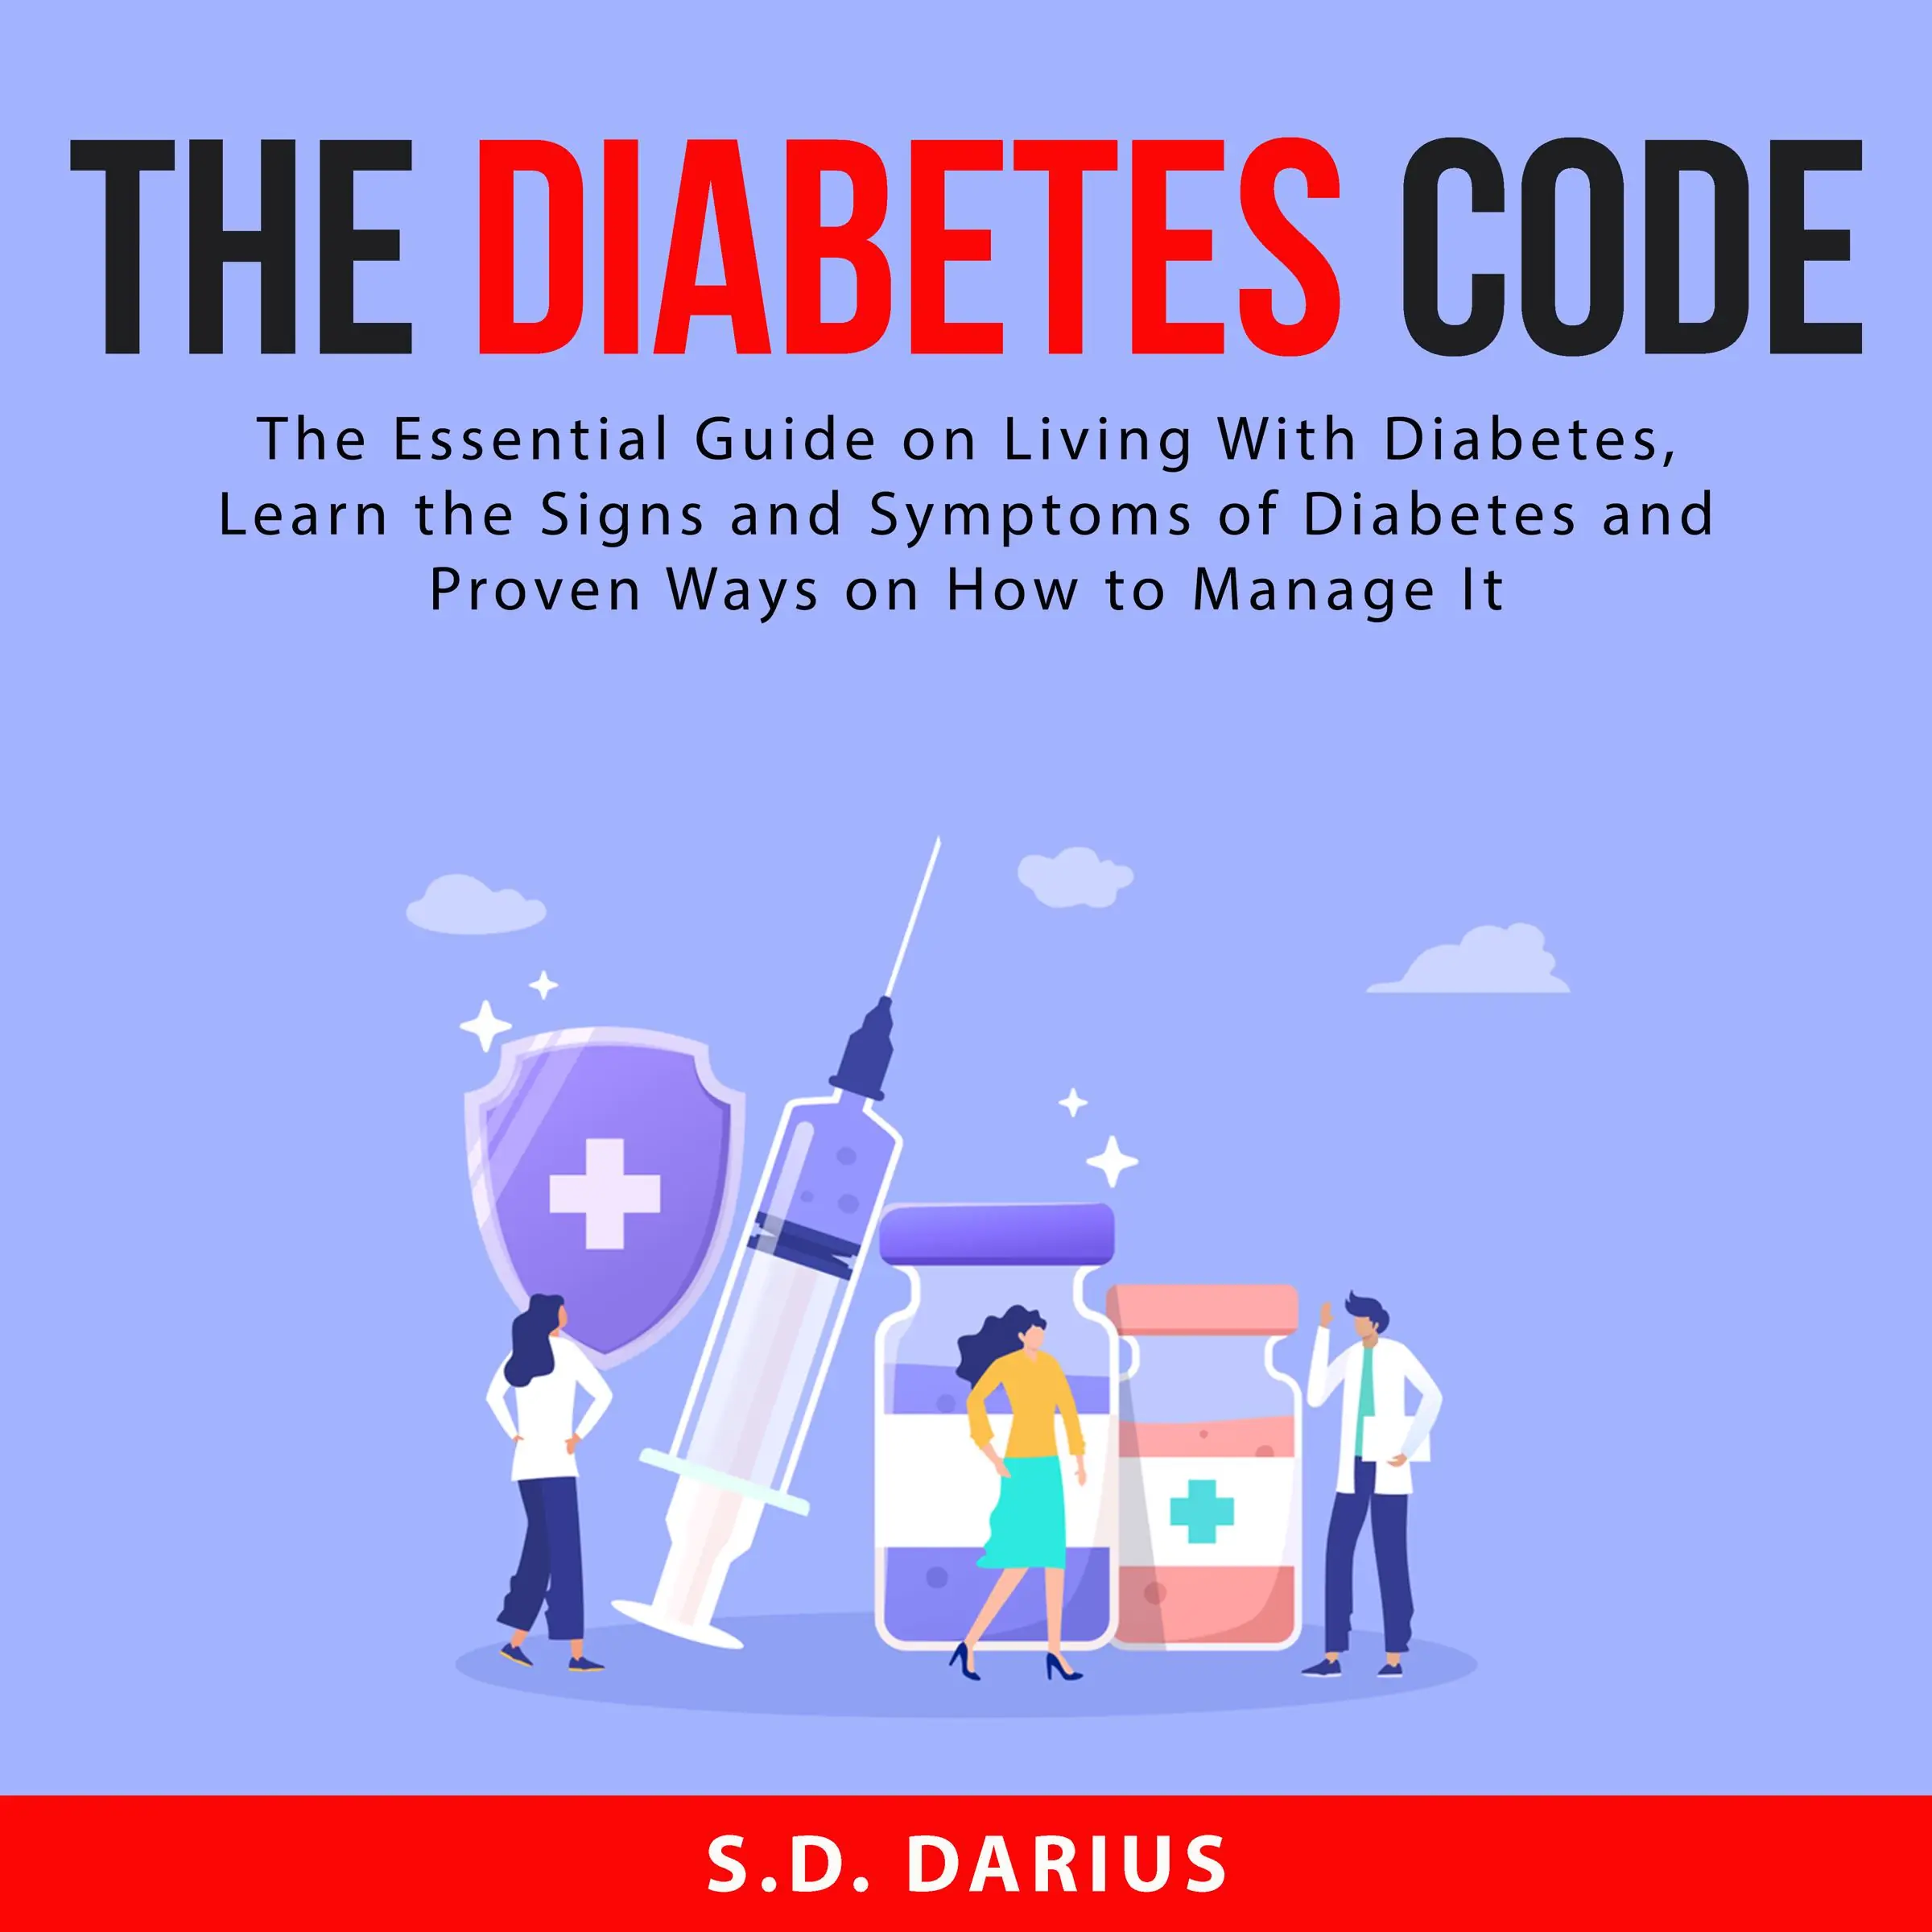 The Diabetes Code: The Essential Guide on Living With Diabetes, Learn the Signs and Symptoms of Diabetes and Proven Ways on How to Manage It Audiobook by S.D. Darius